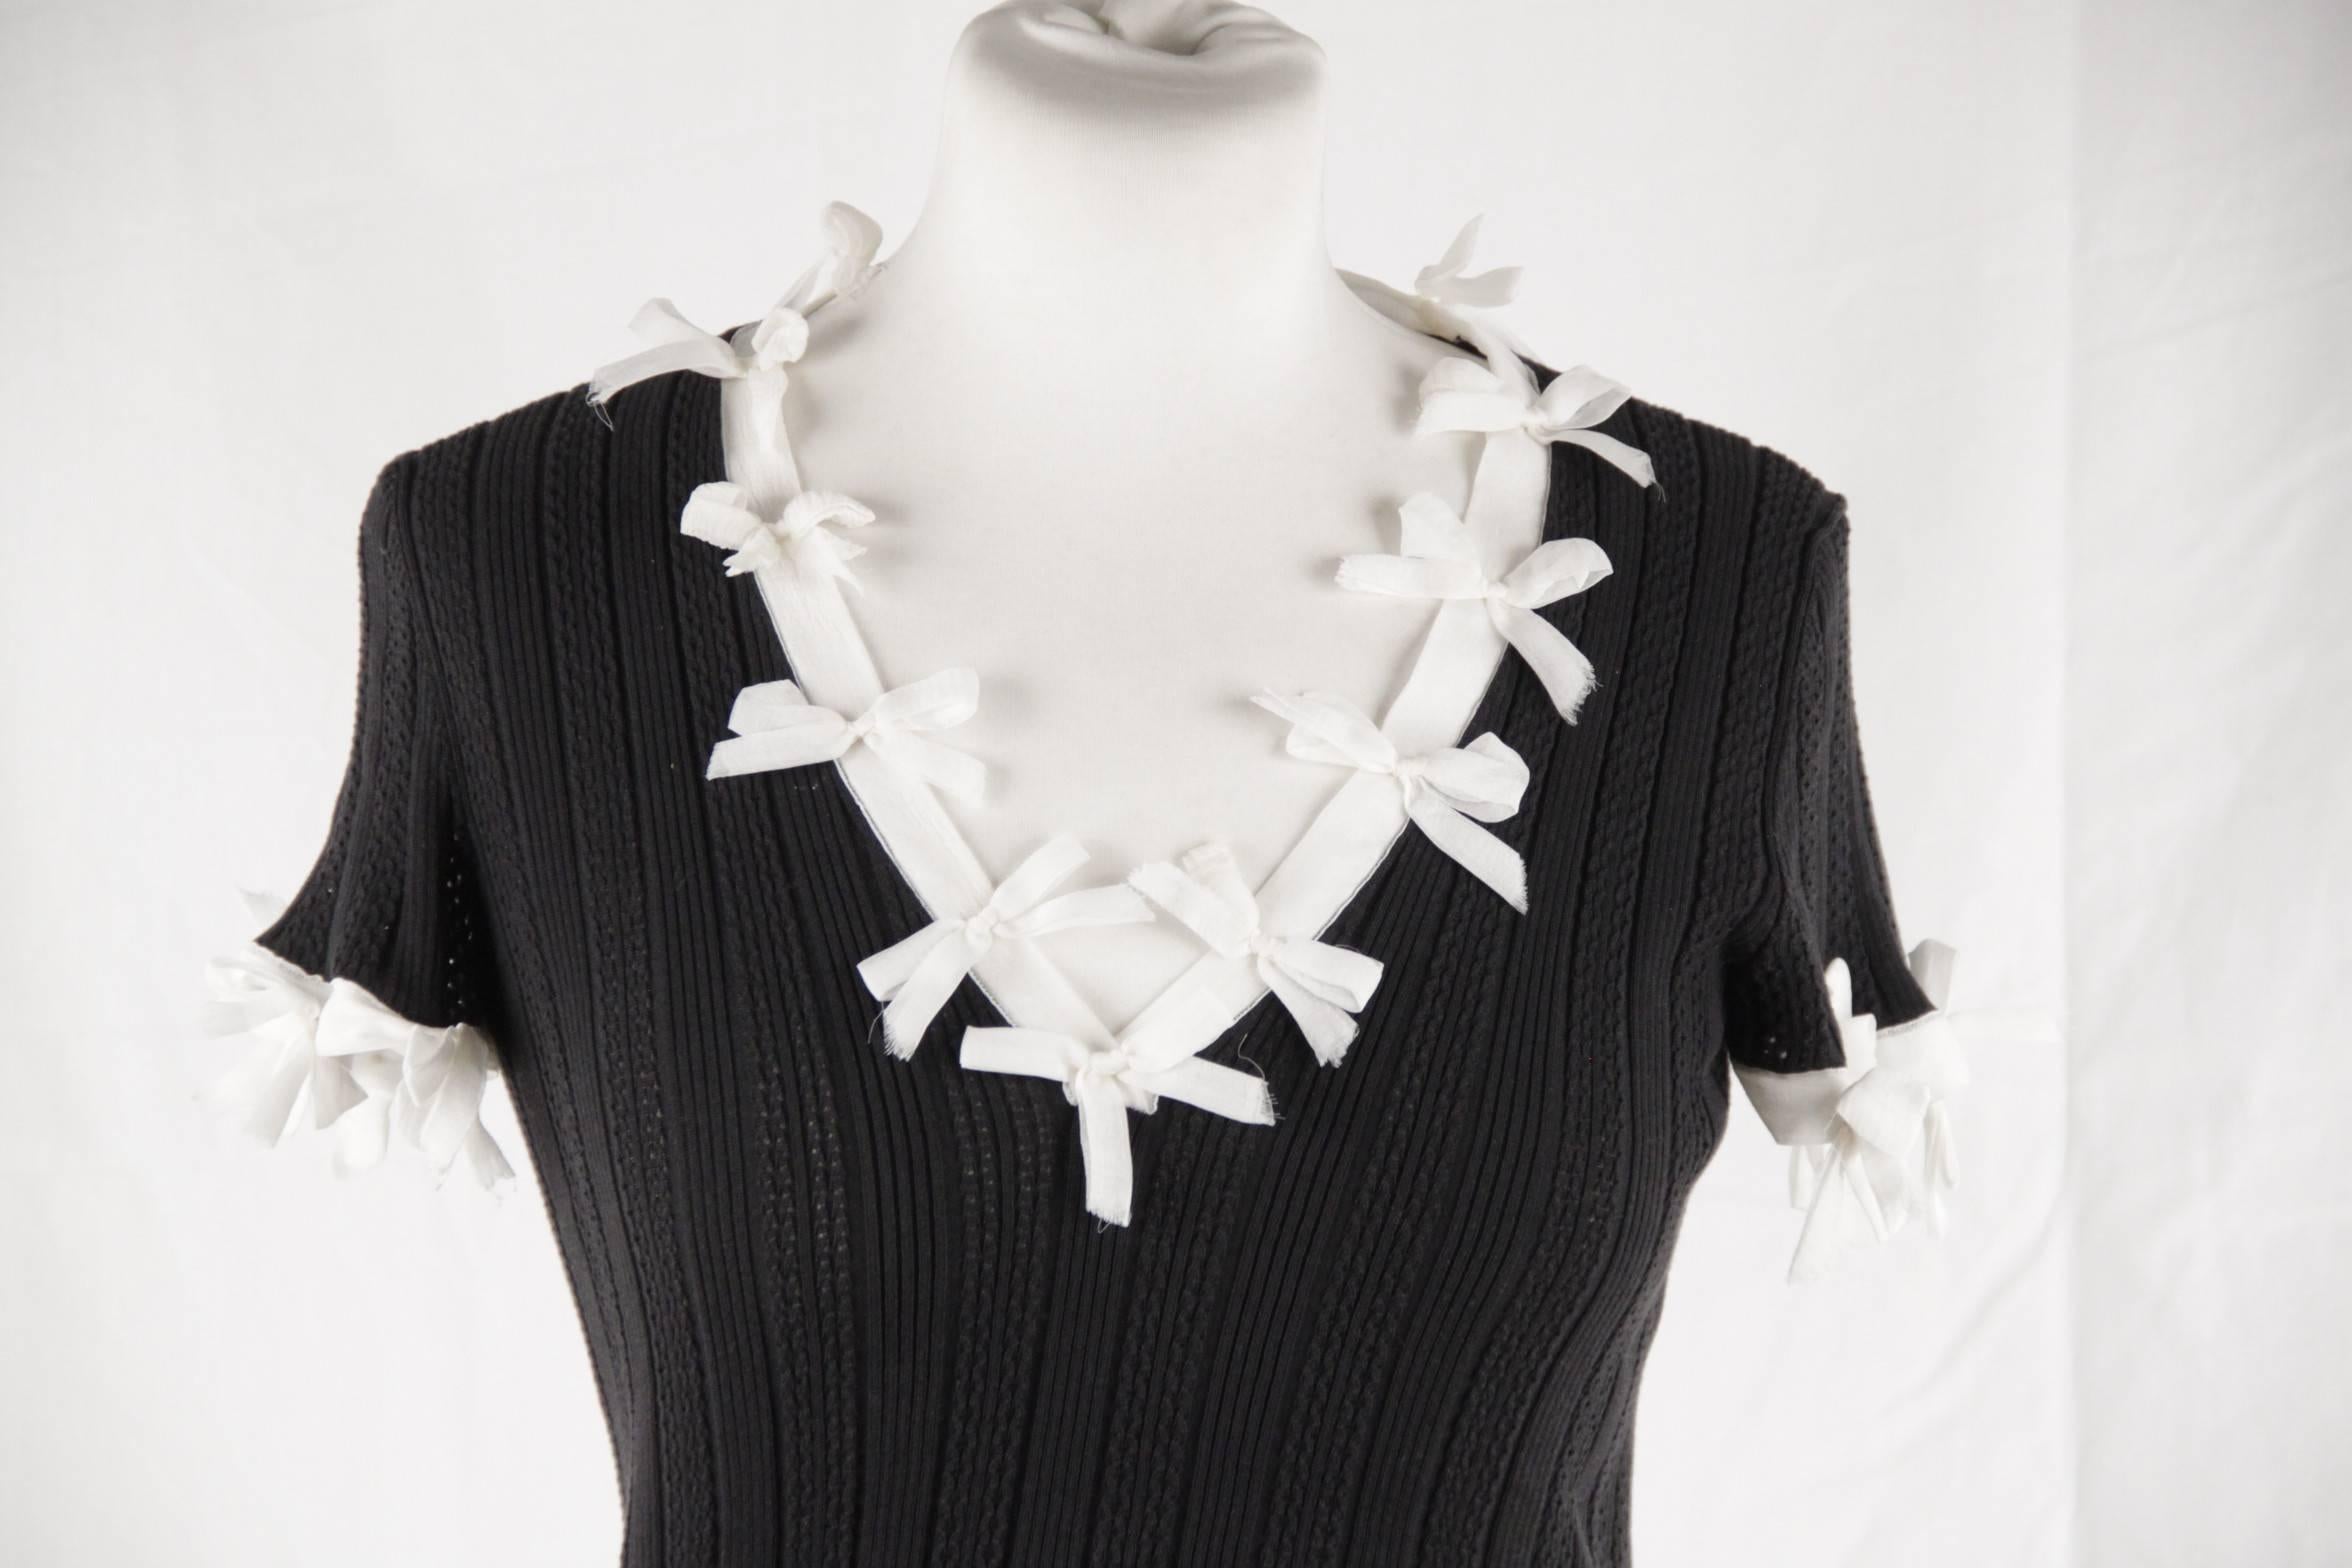  - Black Chanel knit top with short sleeves
- V-neck and rib knit trim
- Accented with white silk bows around collar and sleeves
- CHANEL embossed on a iridescent plaque on the lower left side
- Composition: 100% cotton / Insert: 100% silk
-